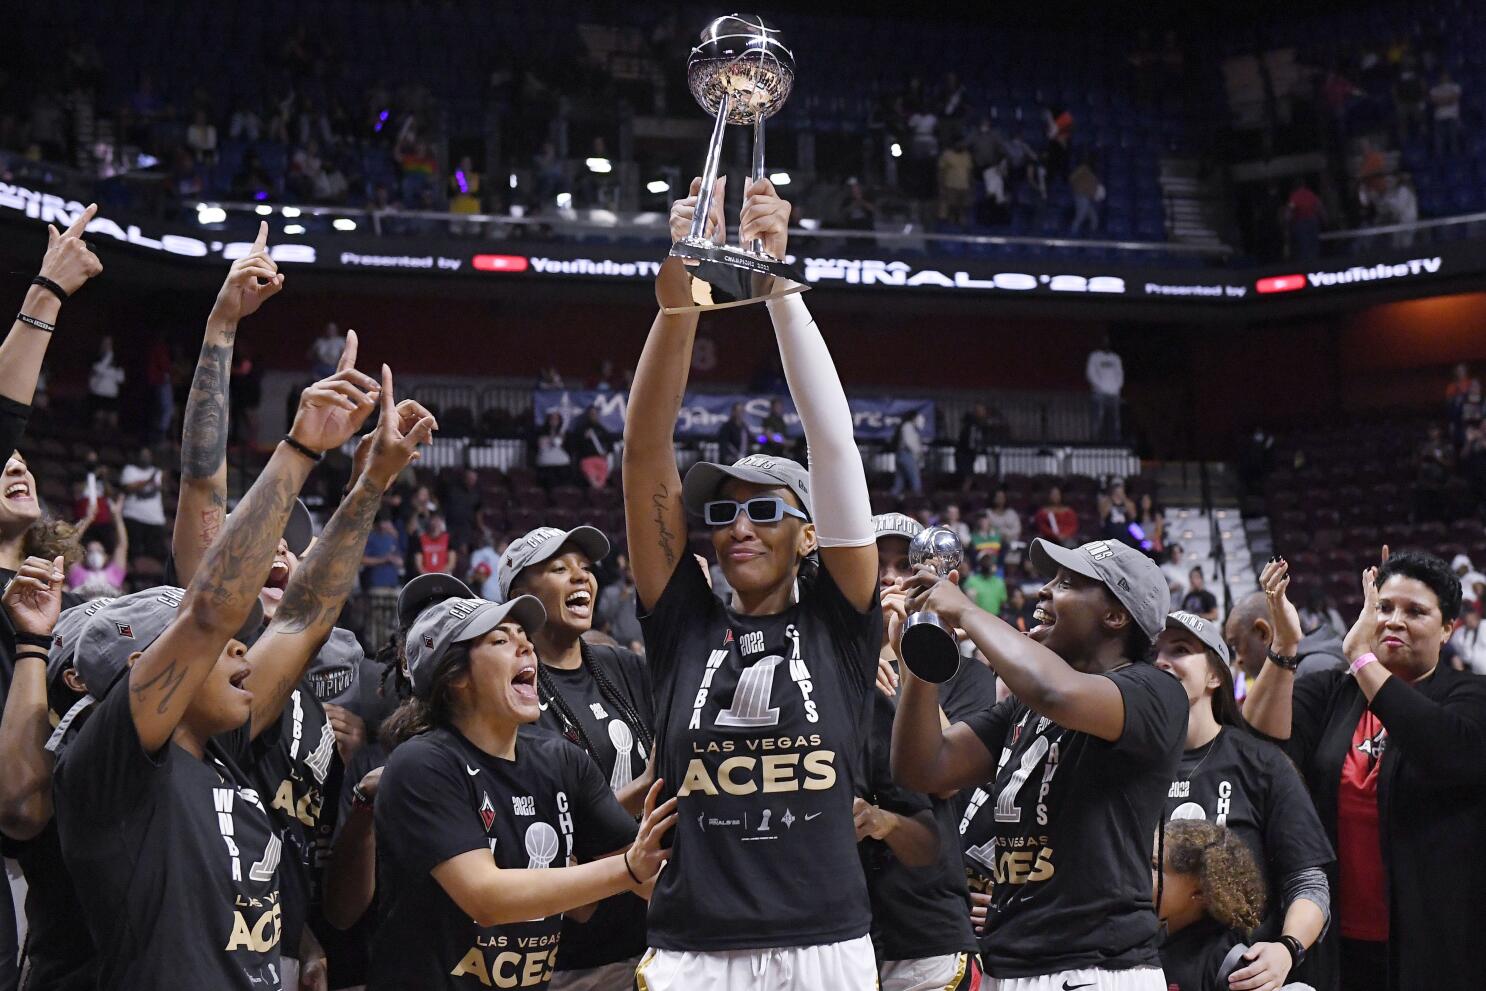 Las Vegas Aces: 15 incredible photos from Aces championship parade